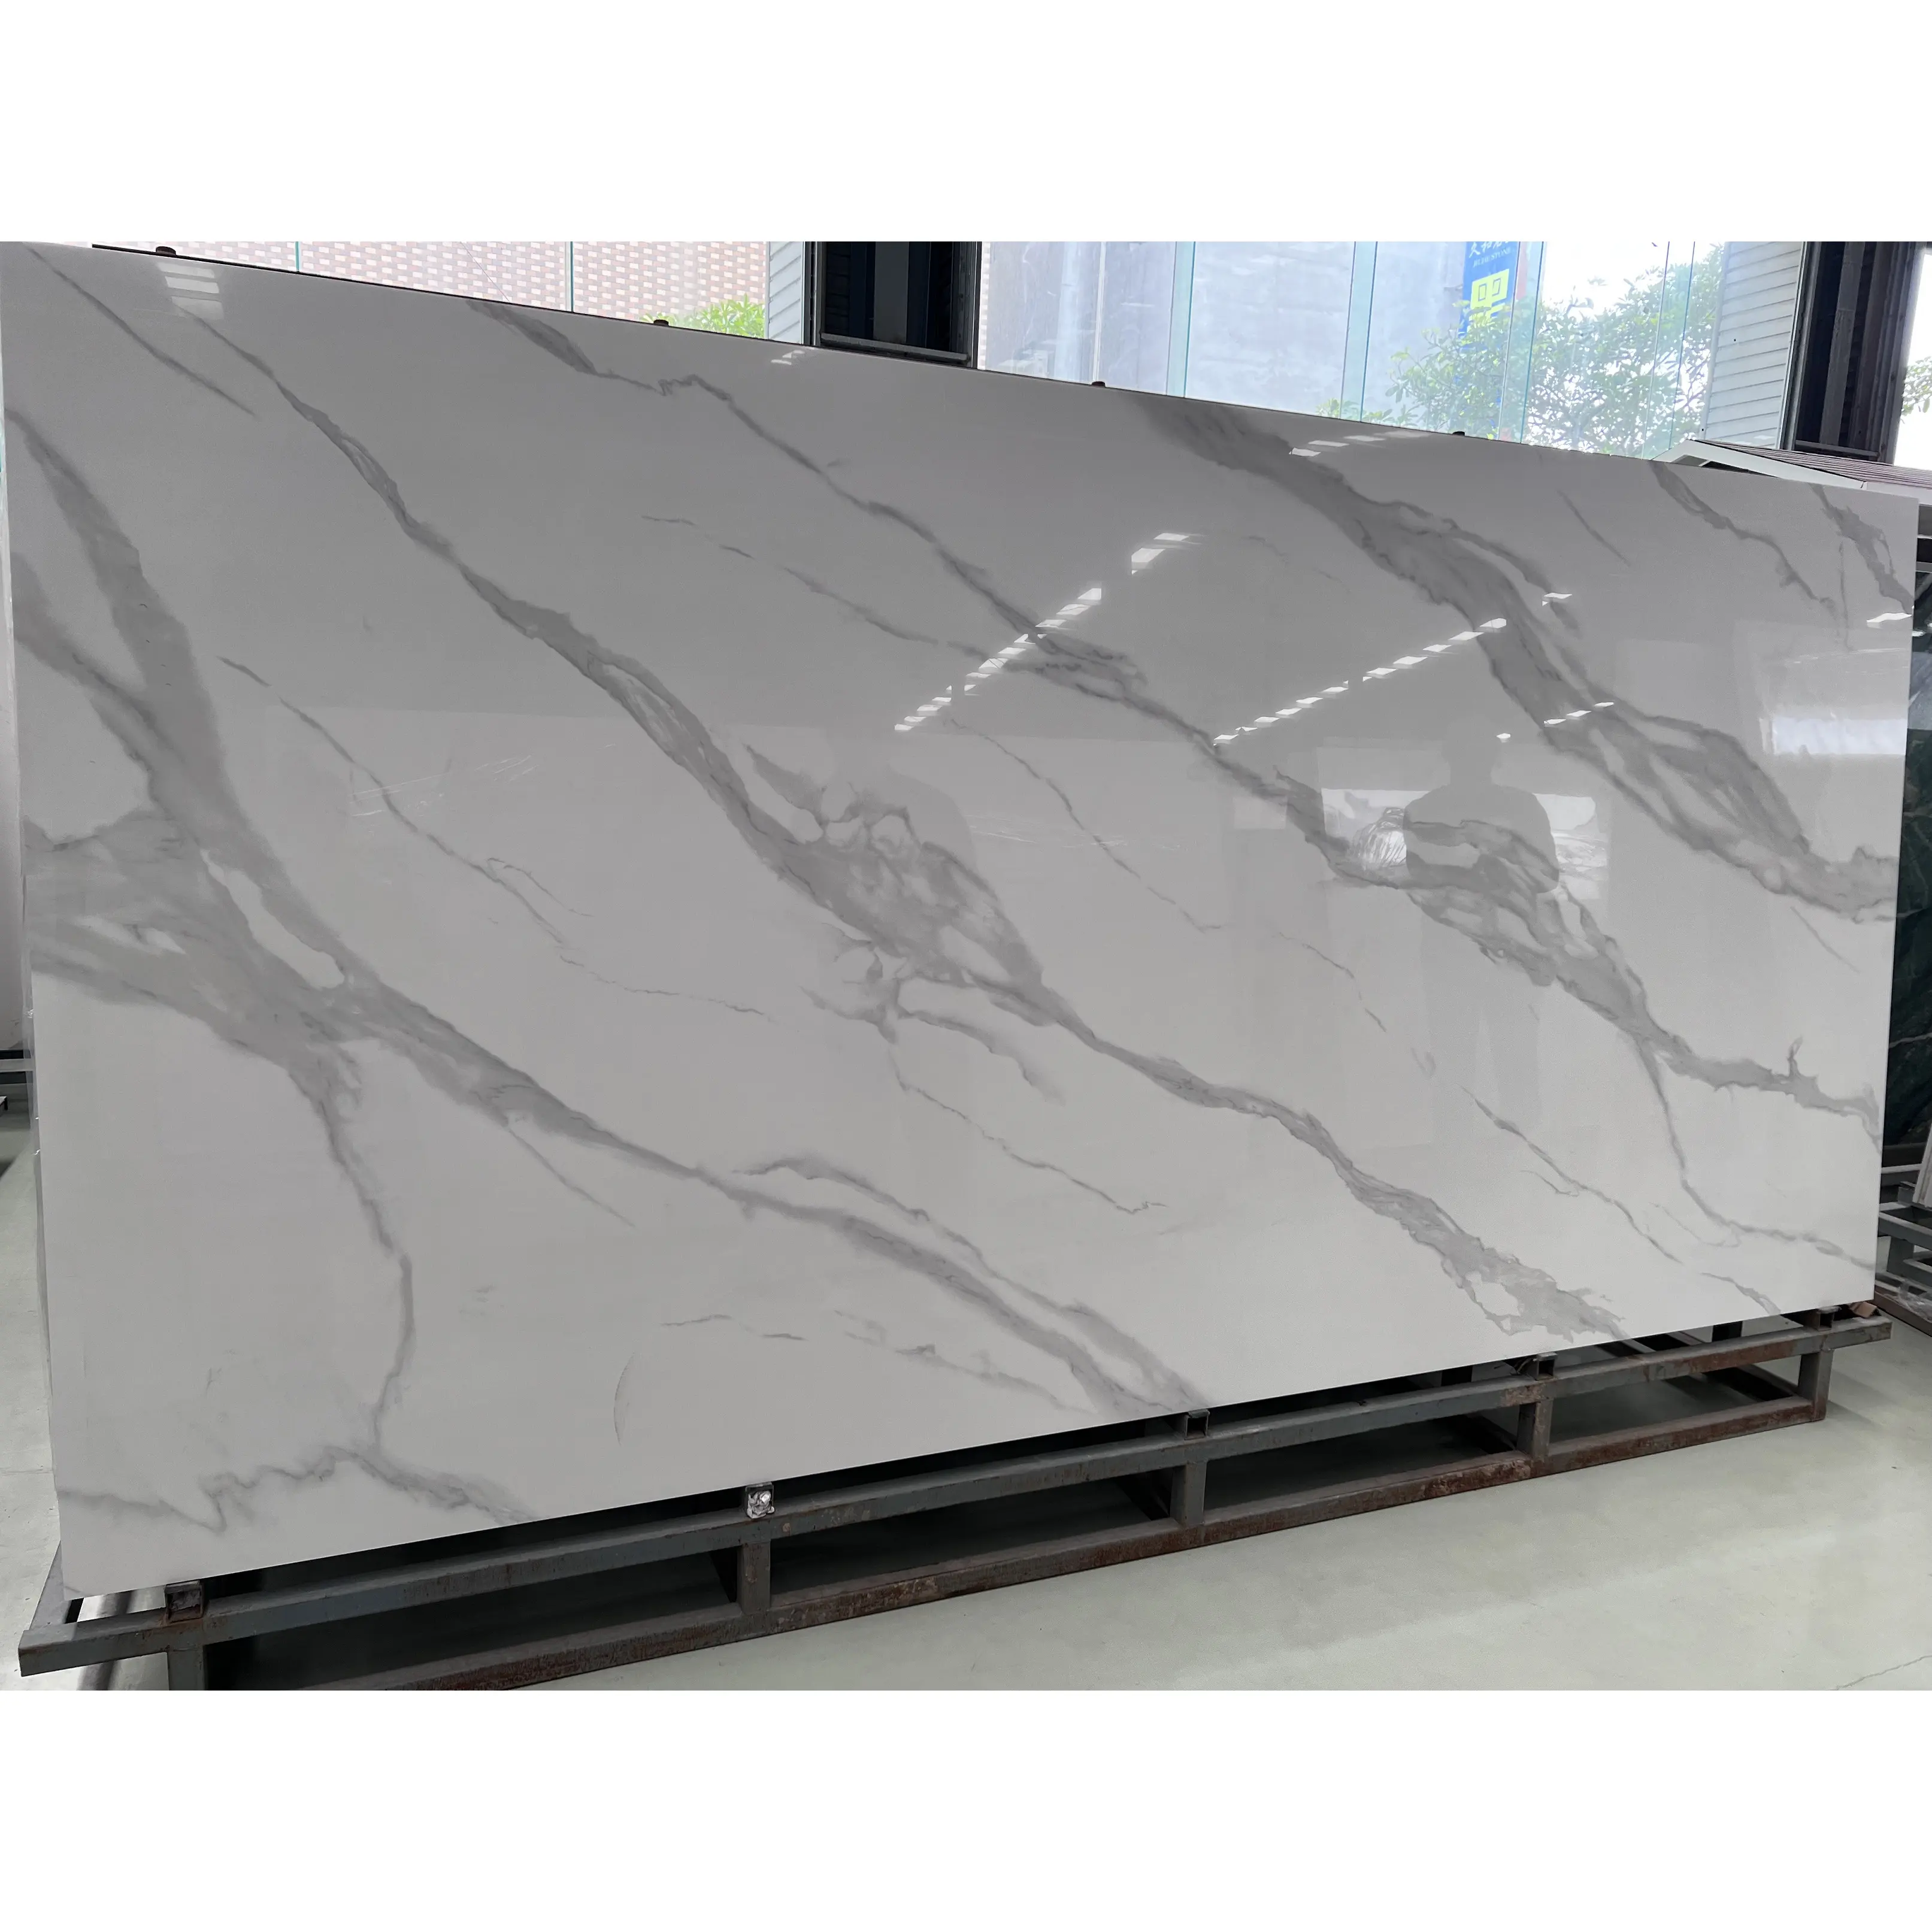 Italian Calacatta Sintered Stone Slabs Large Format Wall Tile Bathroom Vanity Top Marble Sintered Stone For TV Background